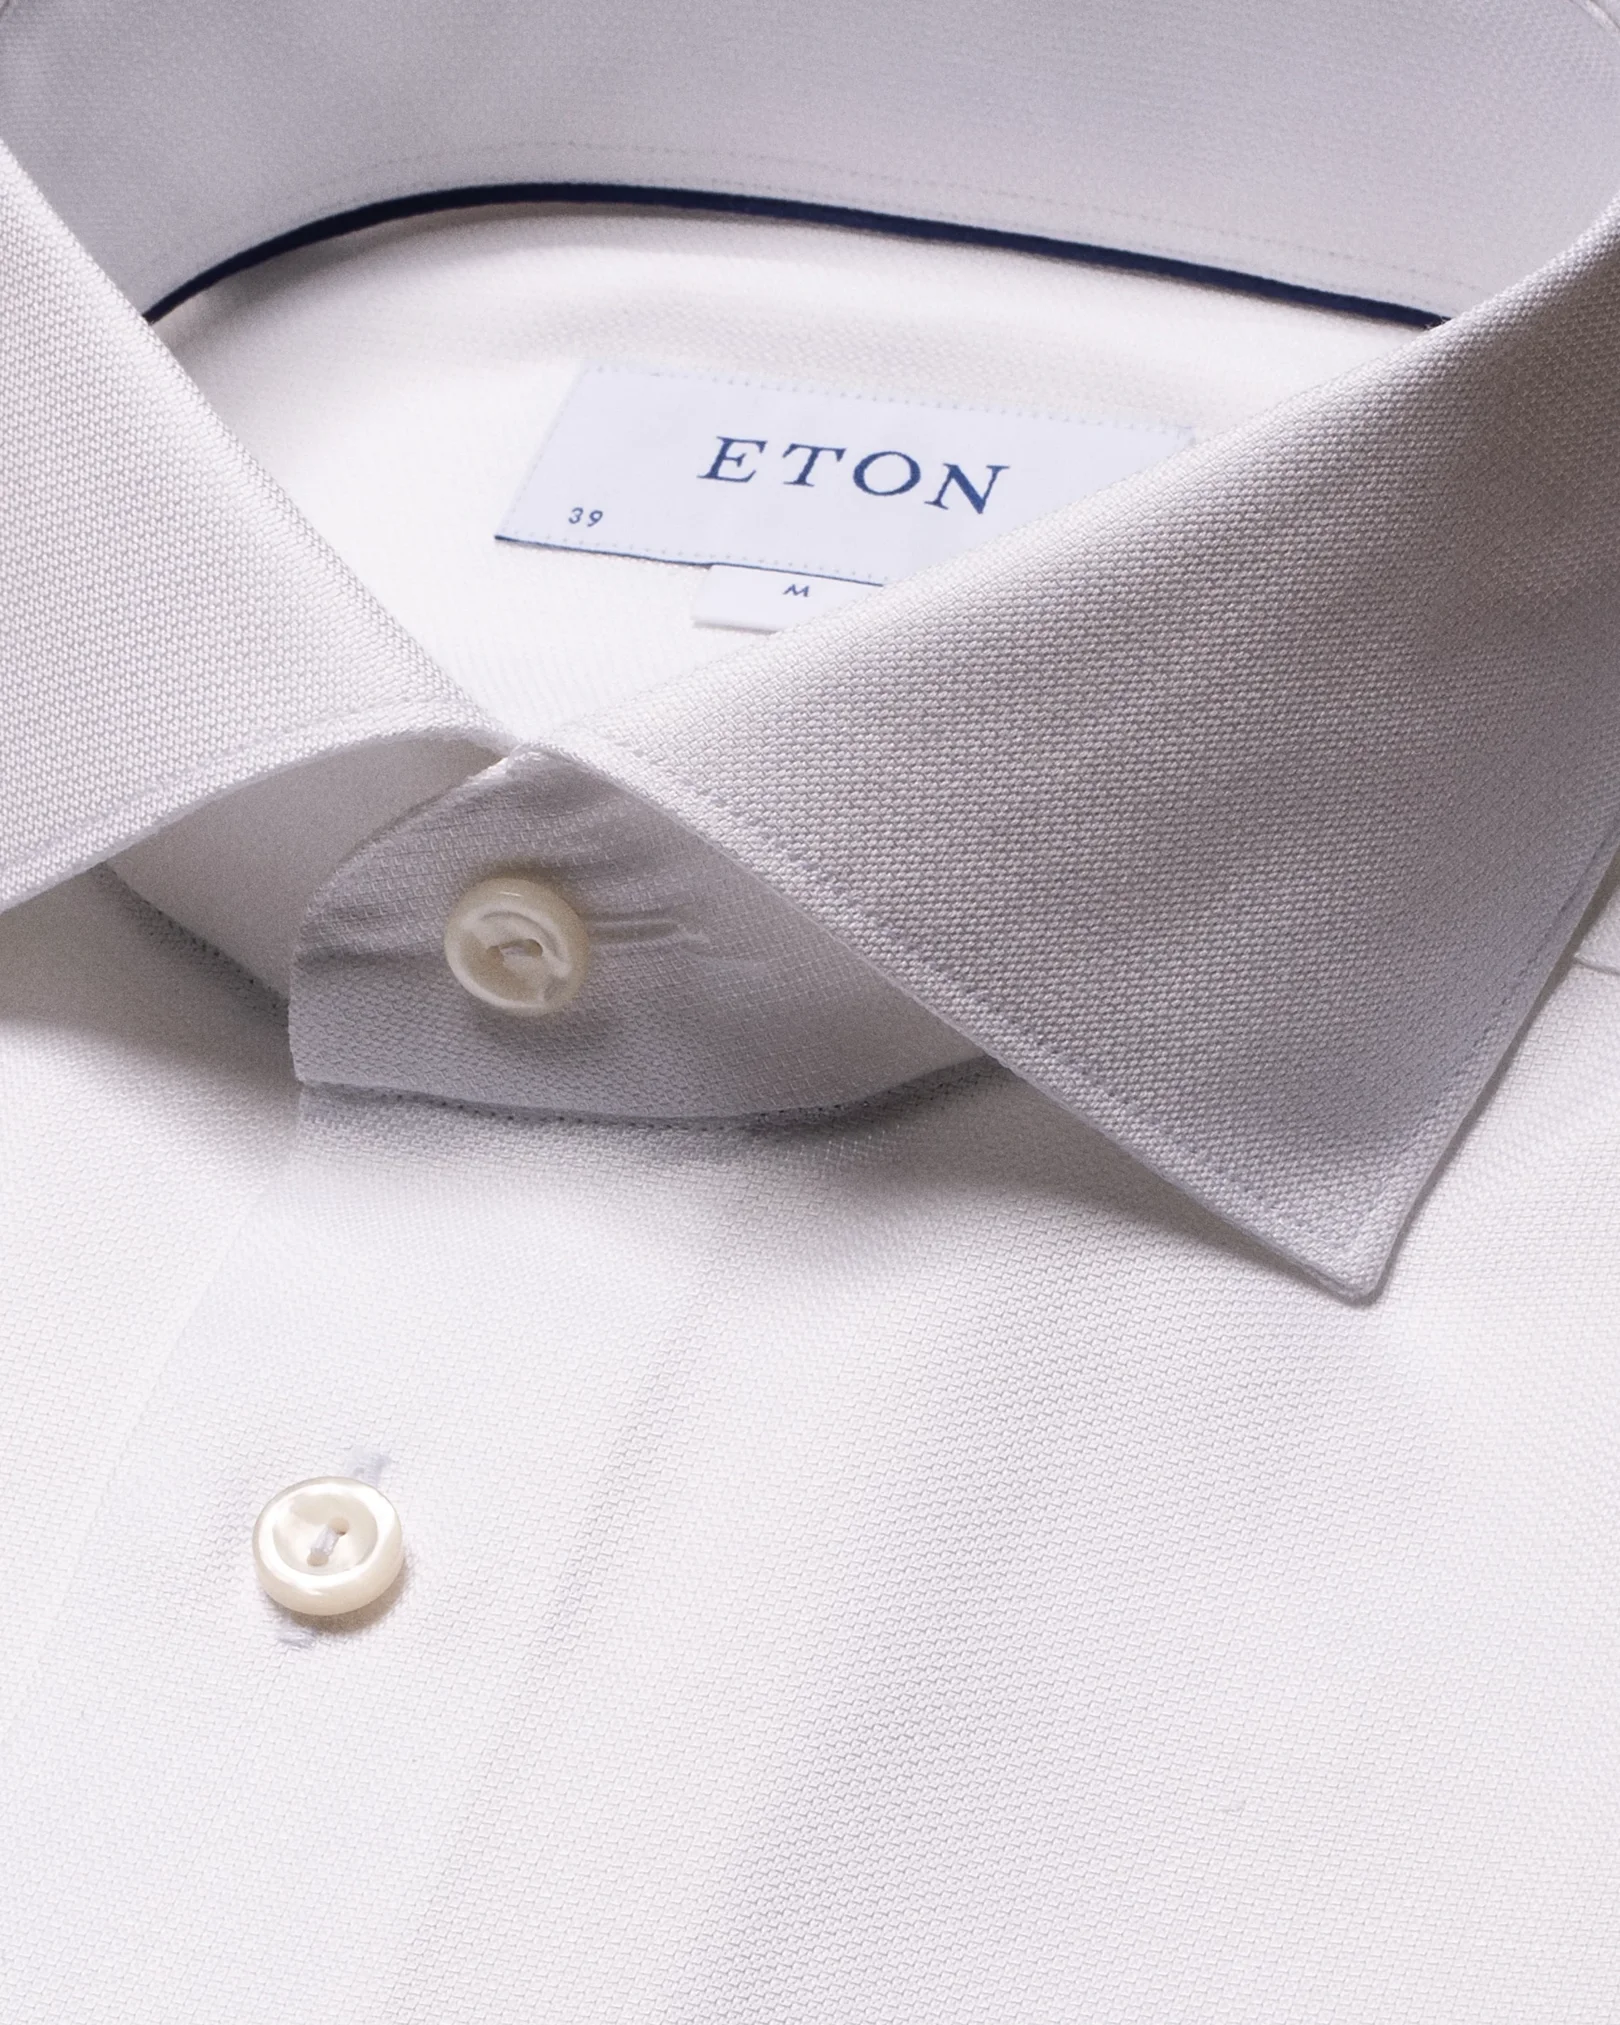 Eton - white cotton lyocell stretch wide spread rounded single one buttonhole slim